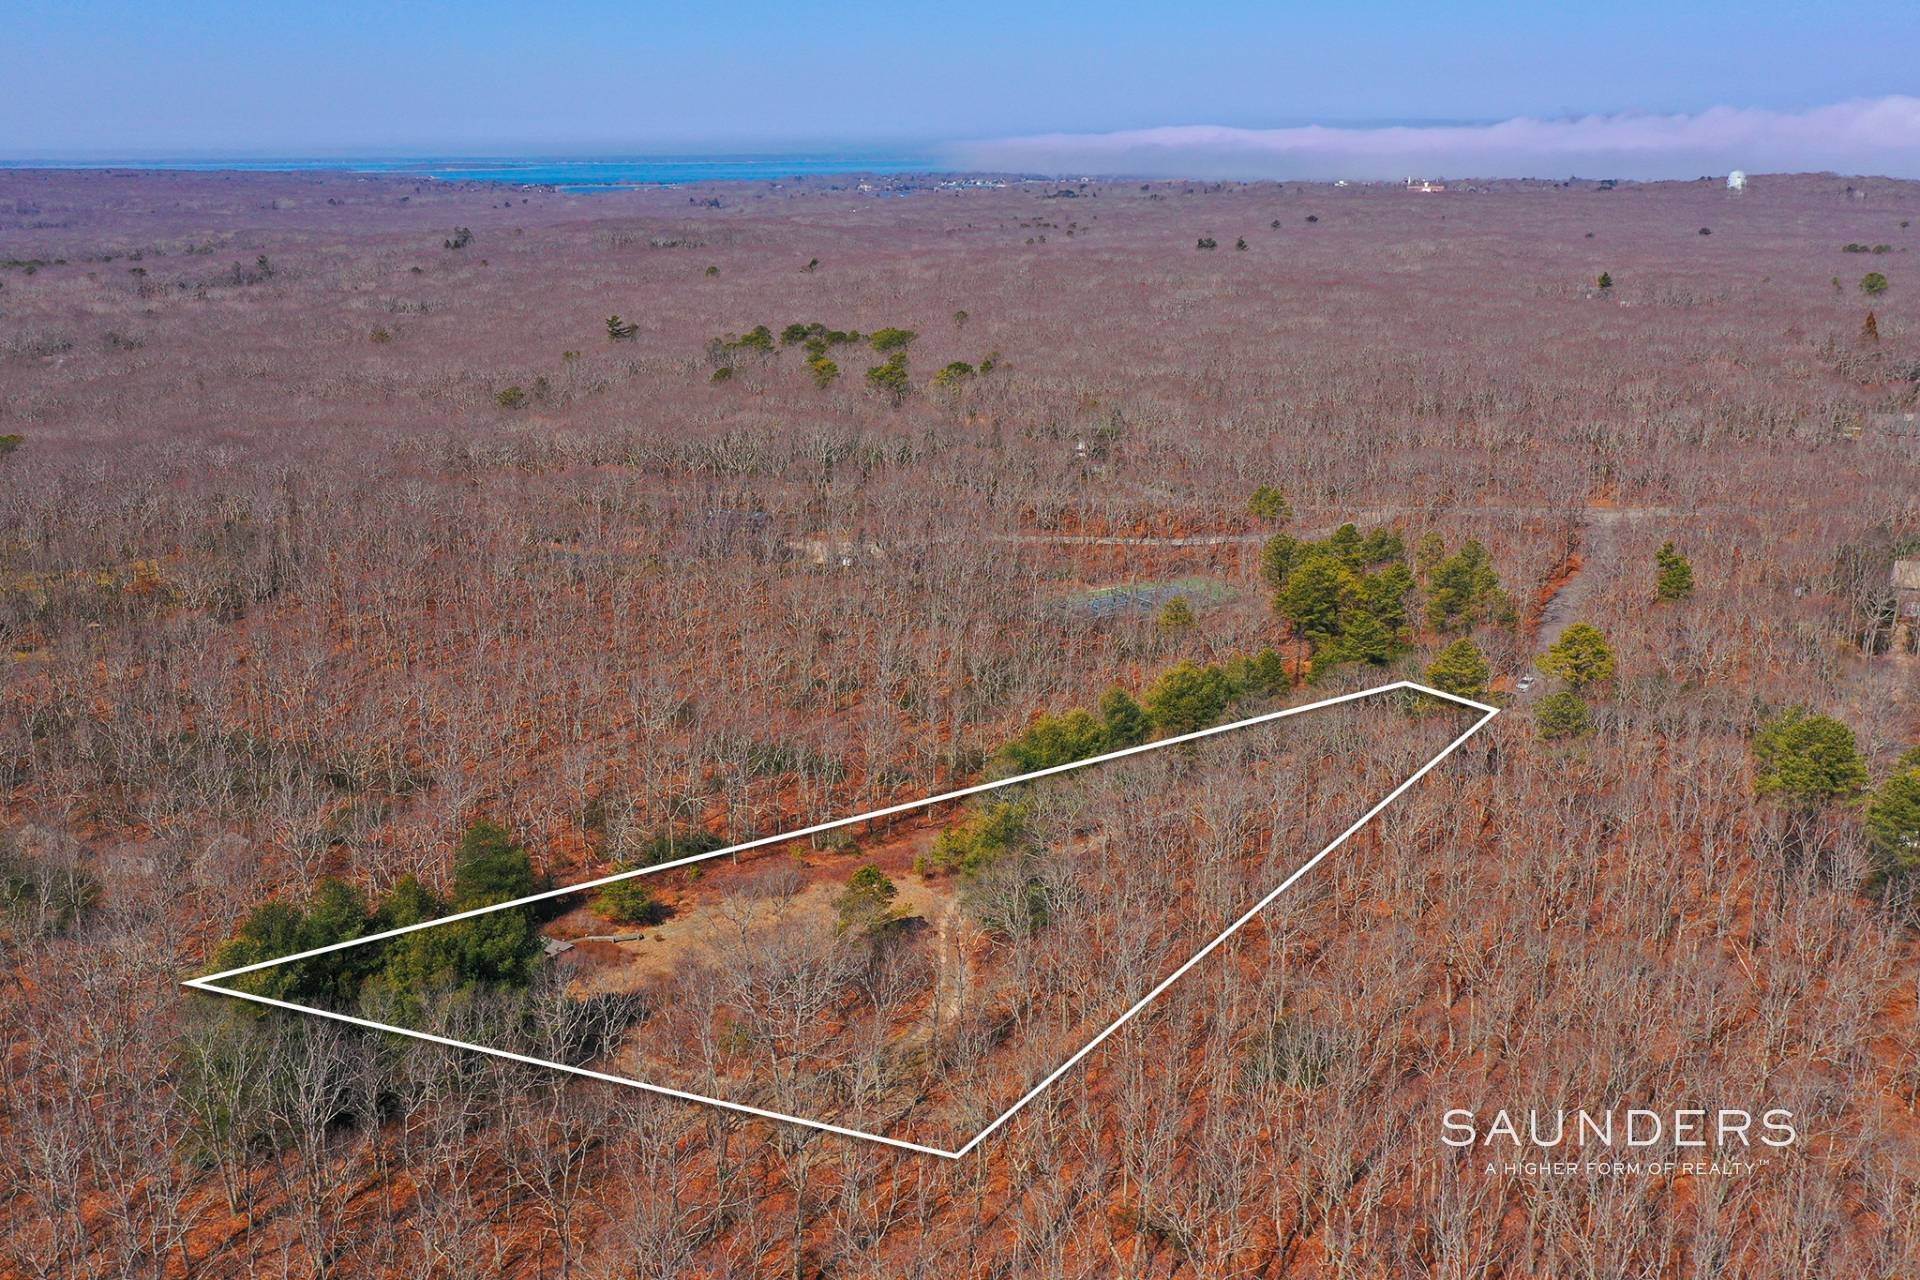 Land for Sale at Private Wainscott Building Lot With Approval For 8 Bedroom Home 141 Merchants Path, Wainscott, NY 11963